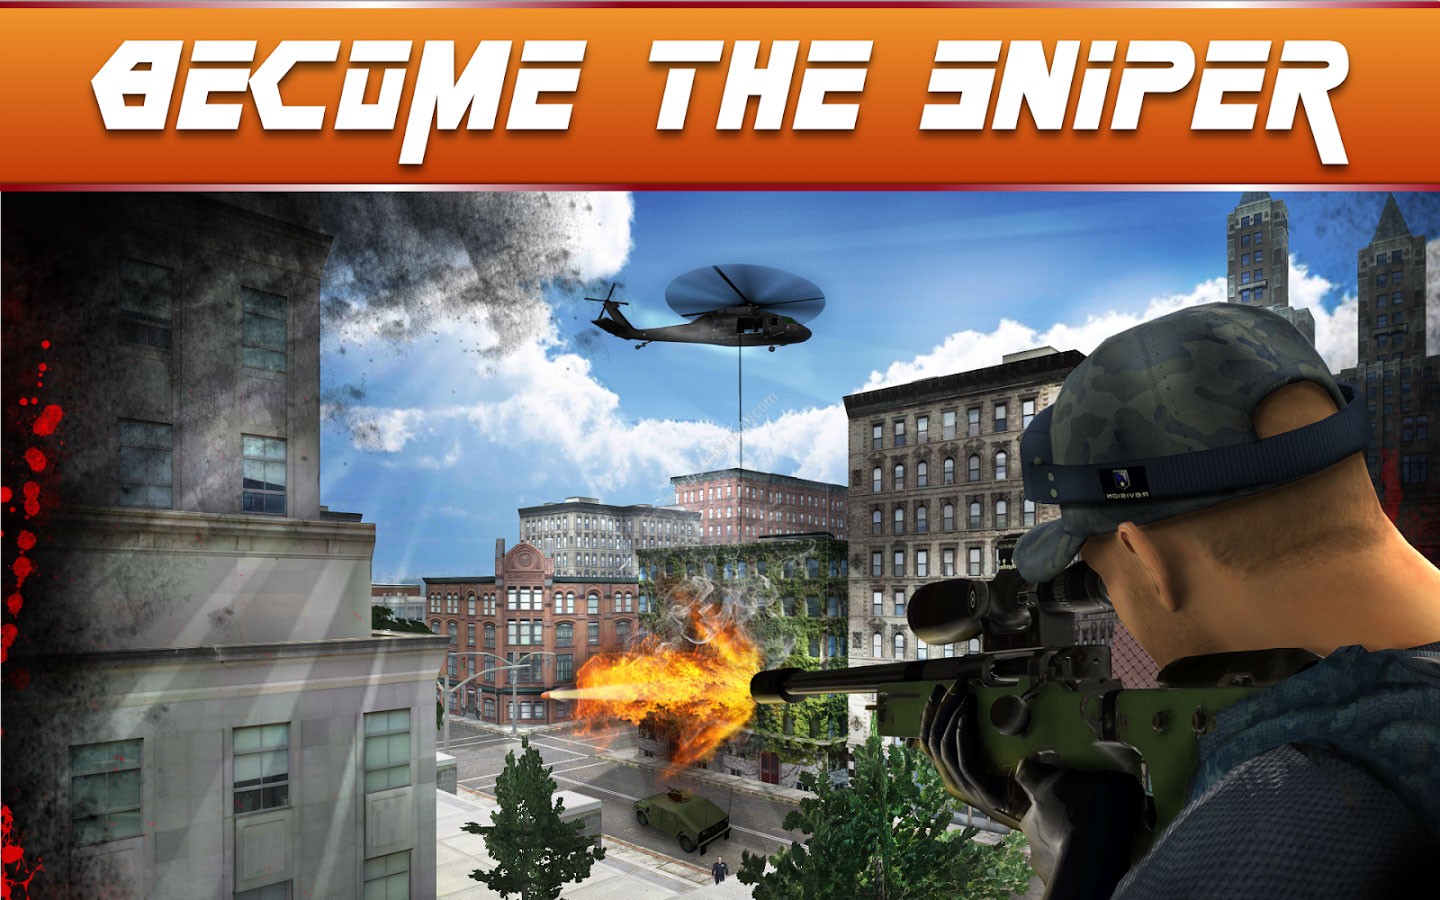 Sniper Ops Shooting for ipod download